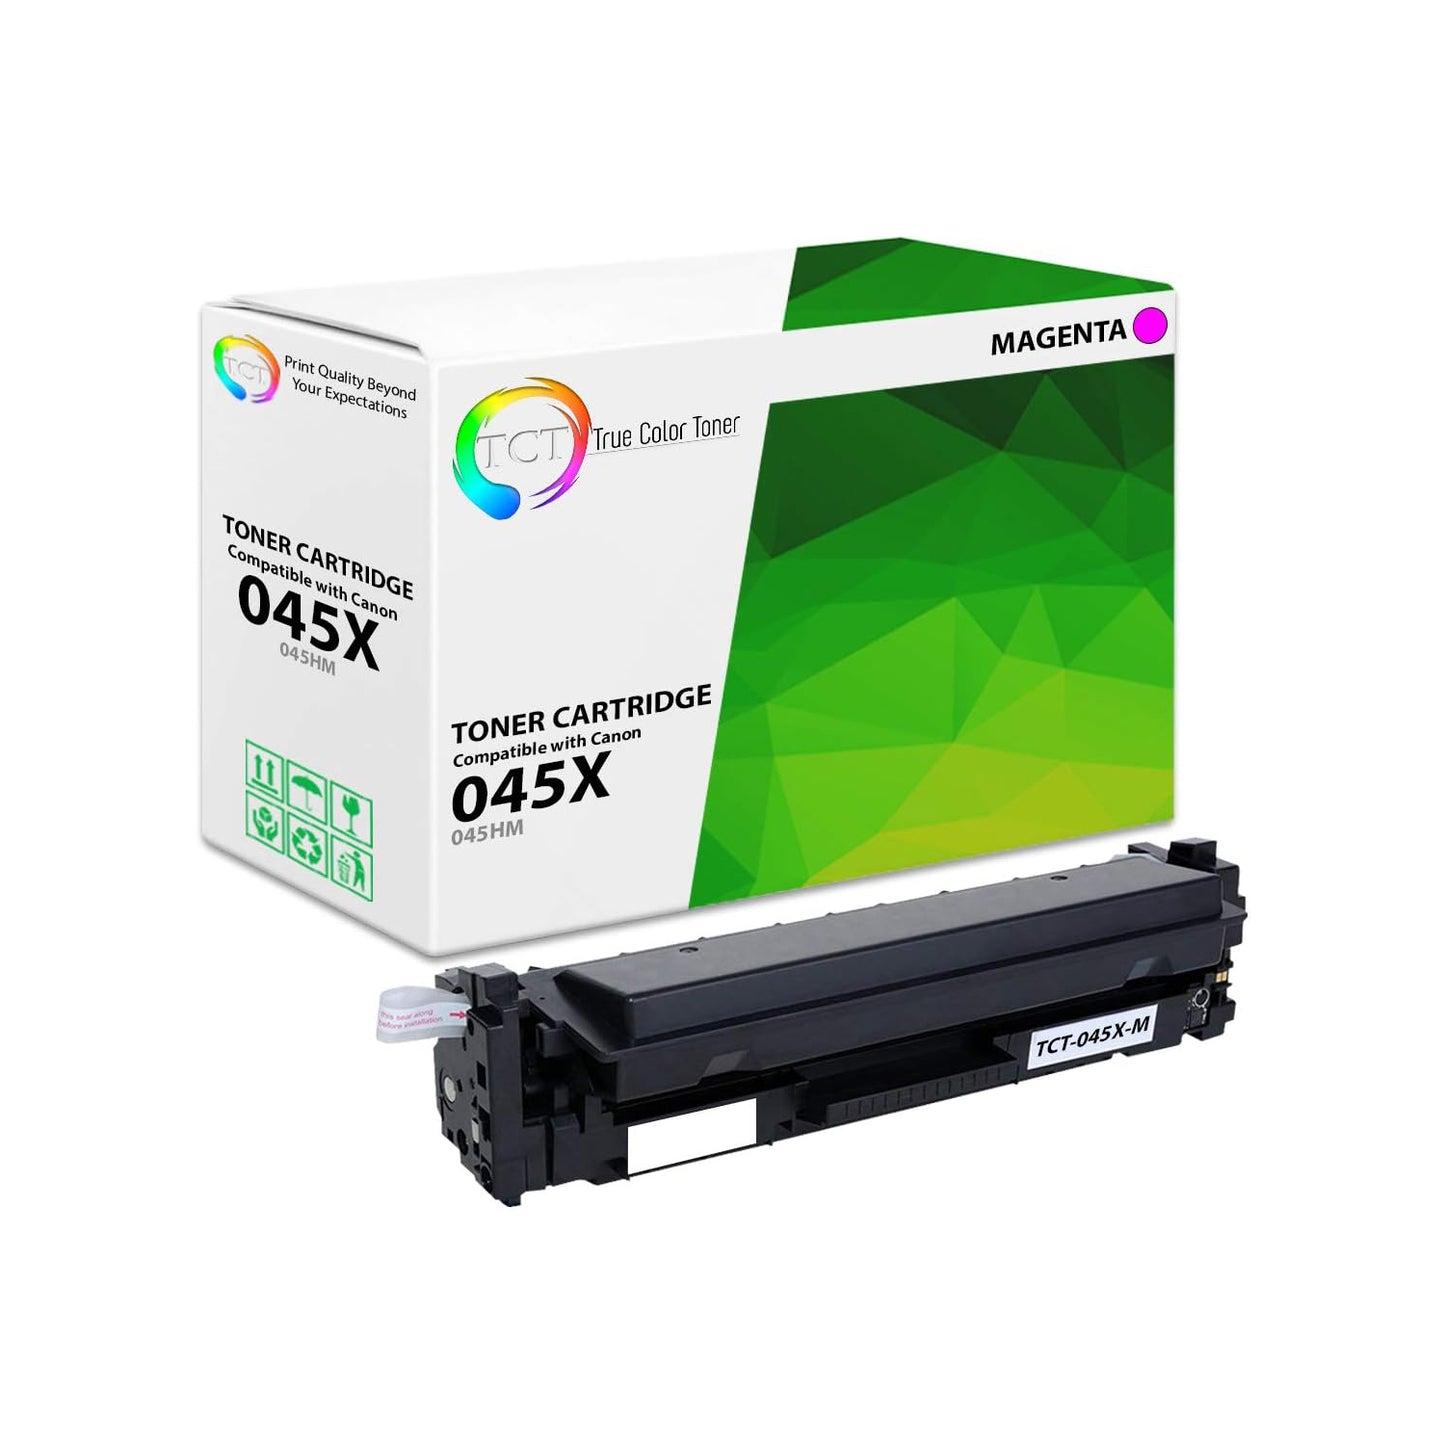 TCT Compatible High Yield Toner Cartridge Replacement for the Canon 045 Series - 1 Pack Magenta